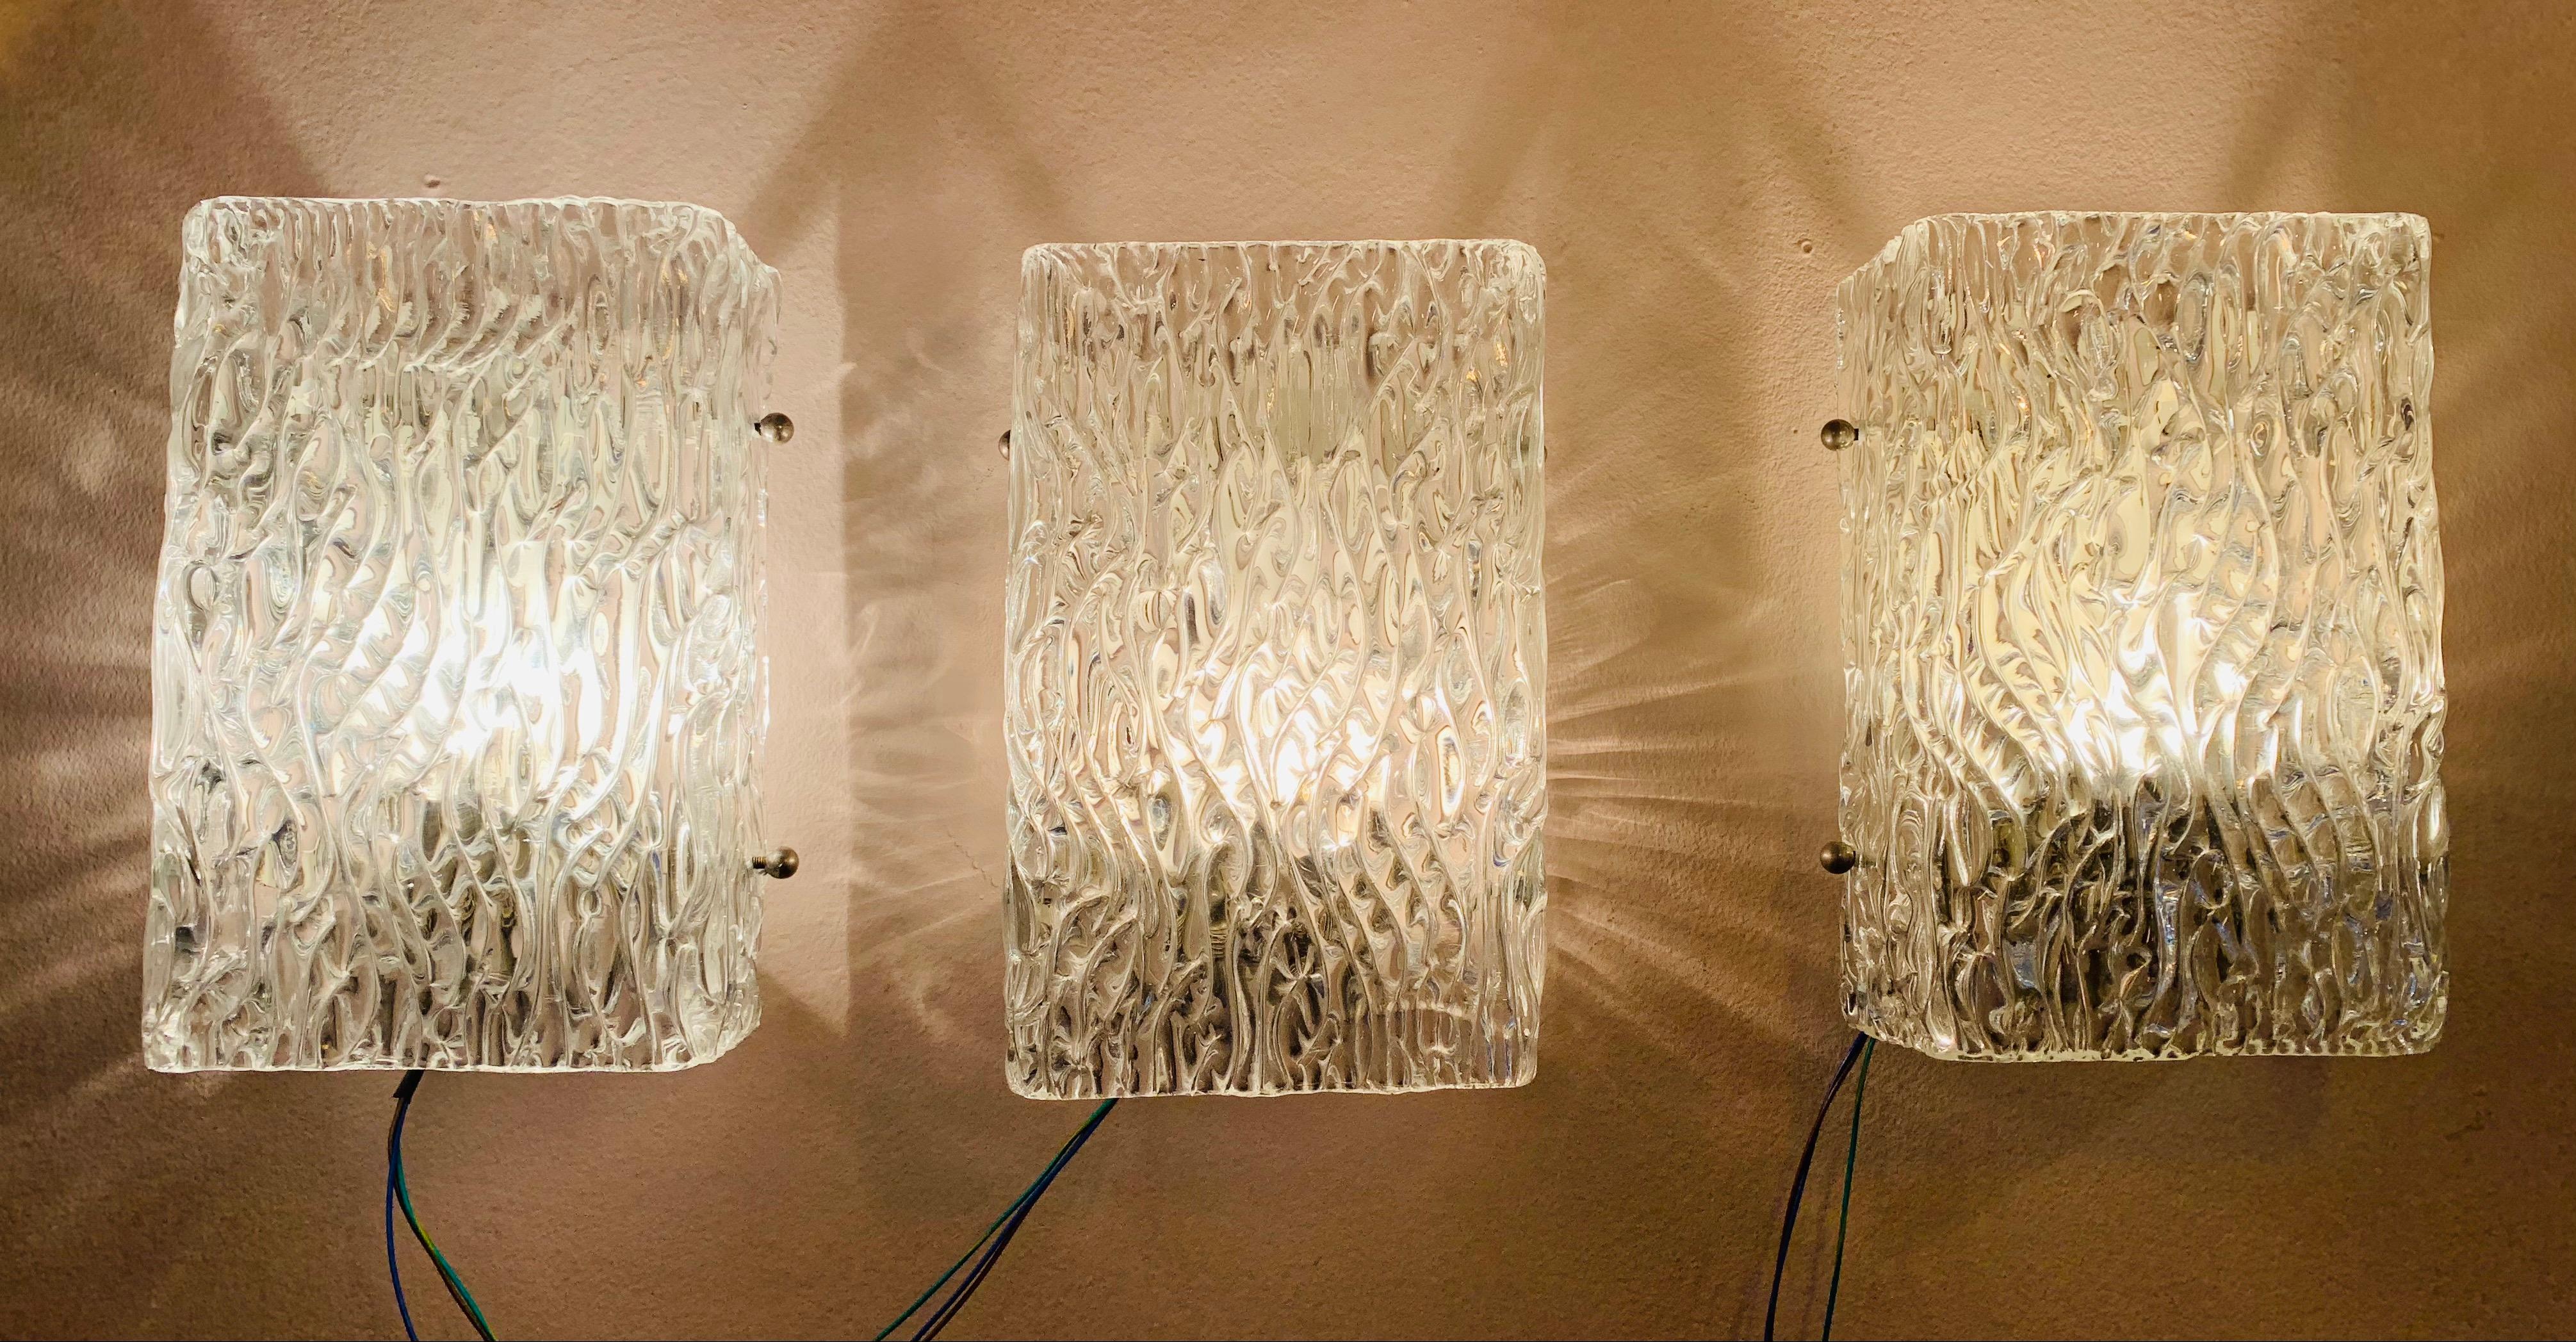 1960s wall lights or sconces designed by J.T. Kalmar and manufactured by Kalmar Lighting in Vienna, Austria. The sculpted, textured, moulded glass has a vertical wave pattern which produces a warm diffused light. The rectangular shade has glass on